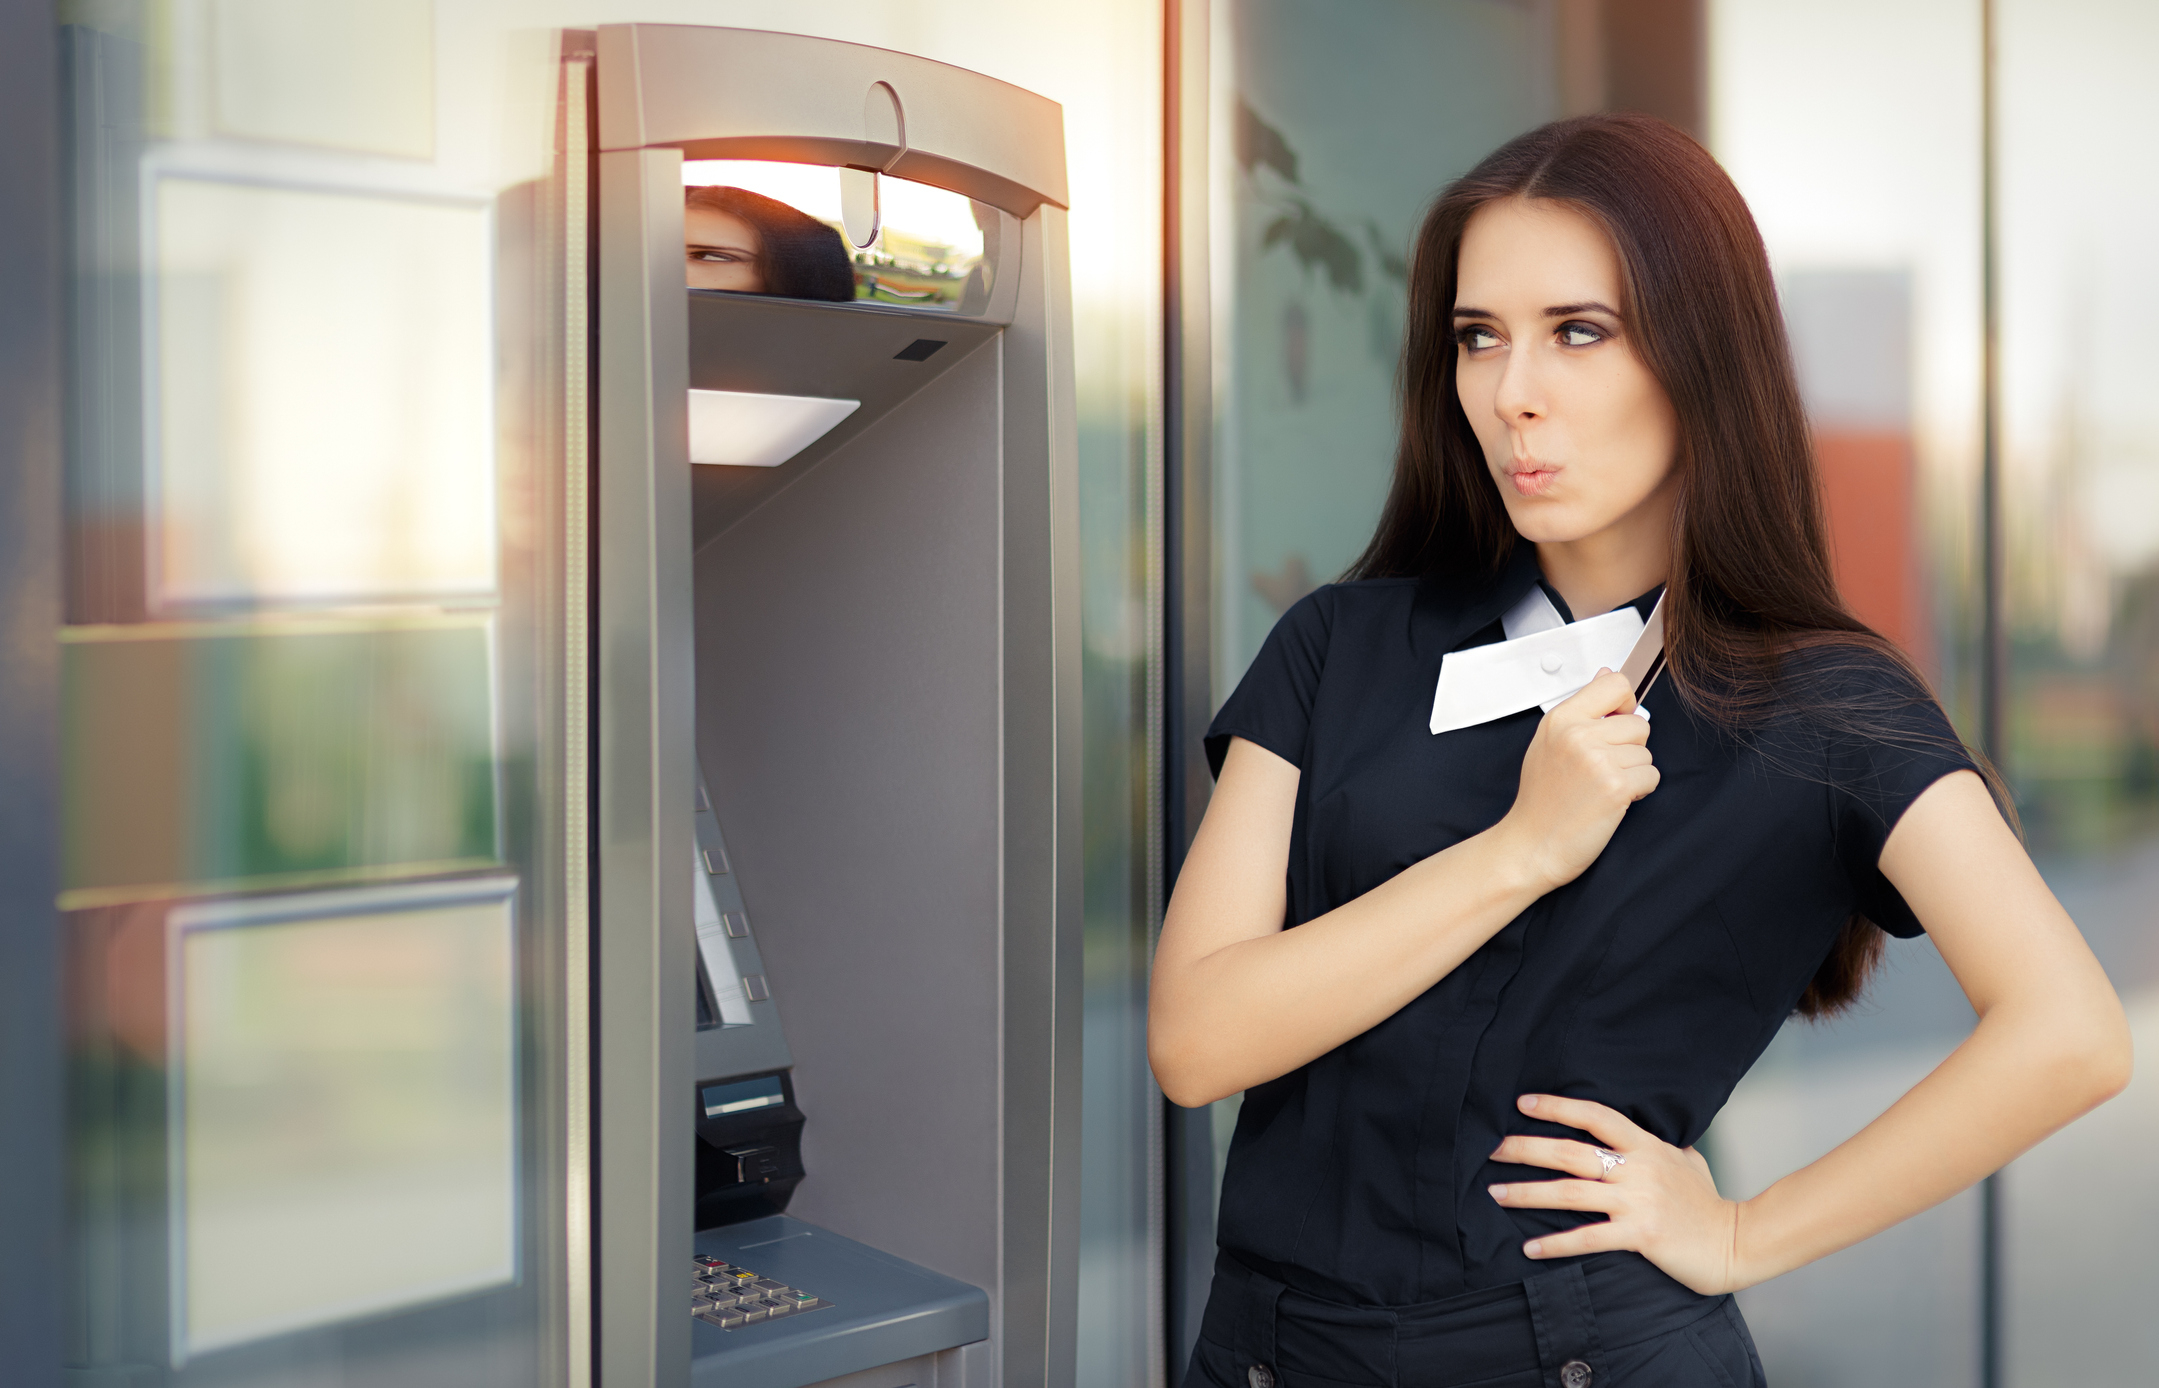 A woman at an ATM